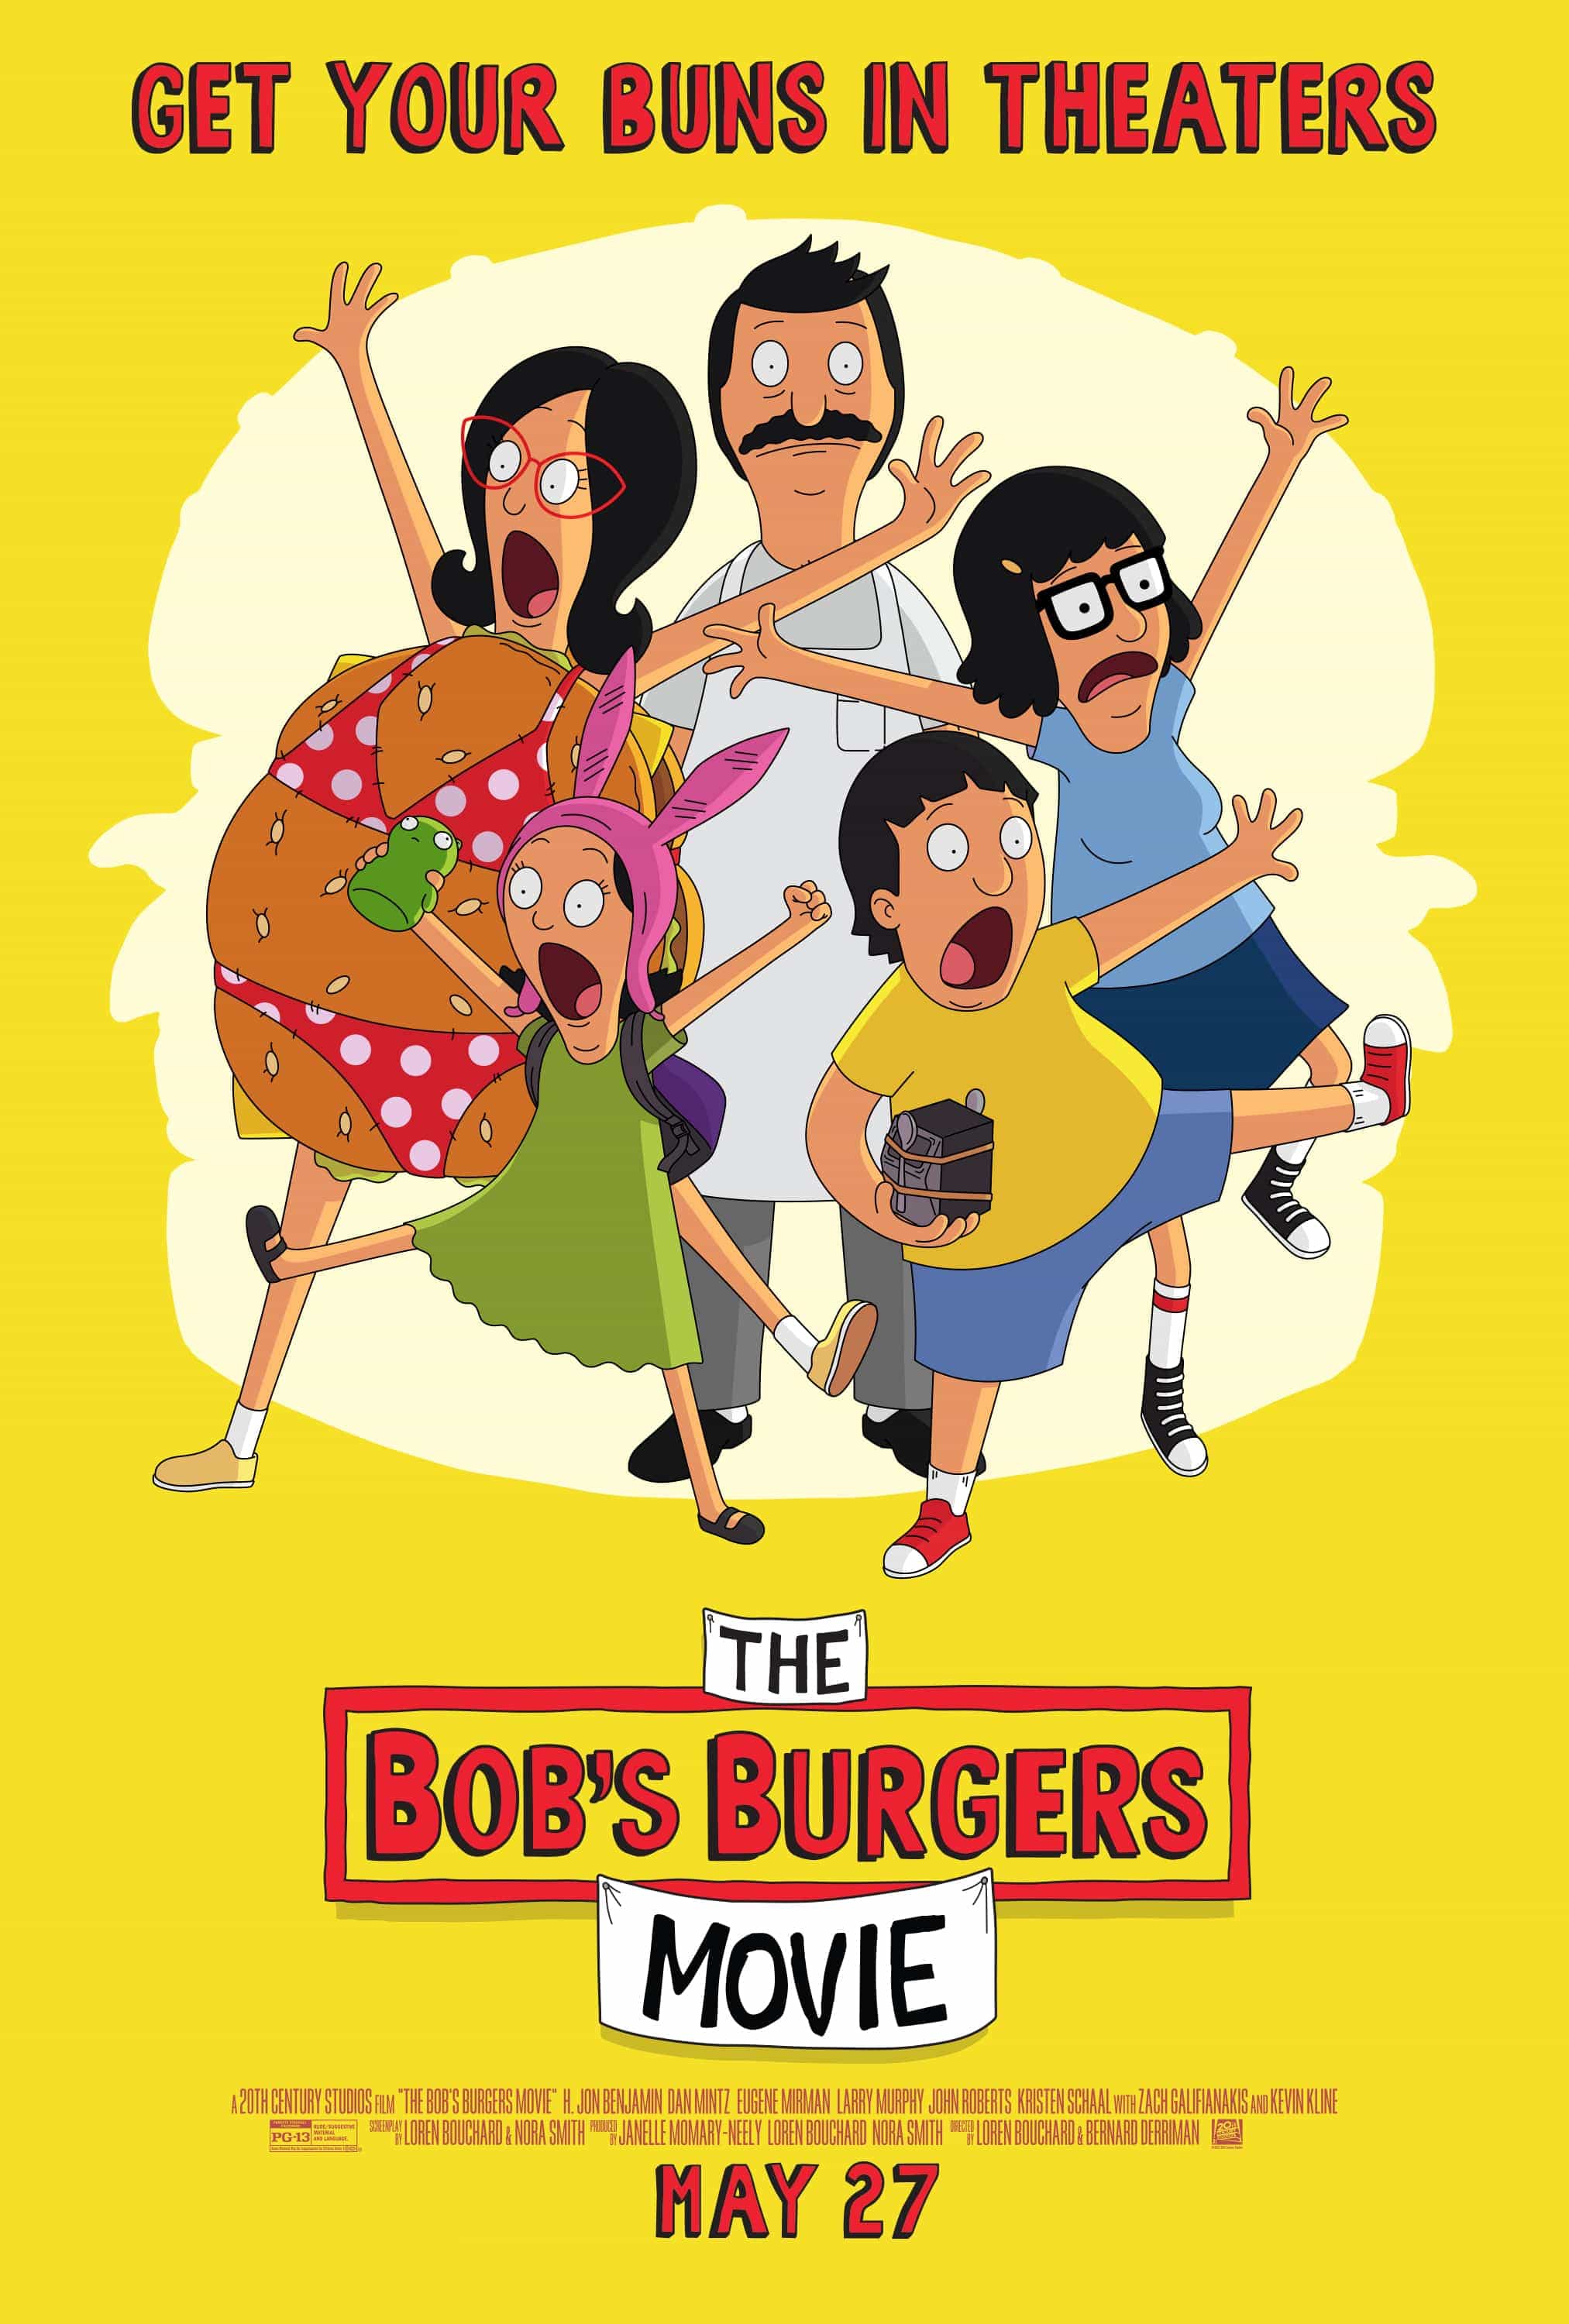 First trailer for The Bobs Burgers Movie starring Kristen Schaal - movie UK release date is currently 27th May 2022 #thebobsburgersmovie